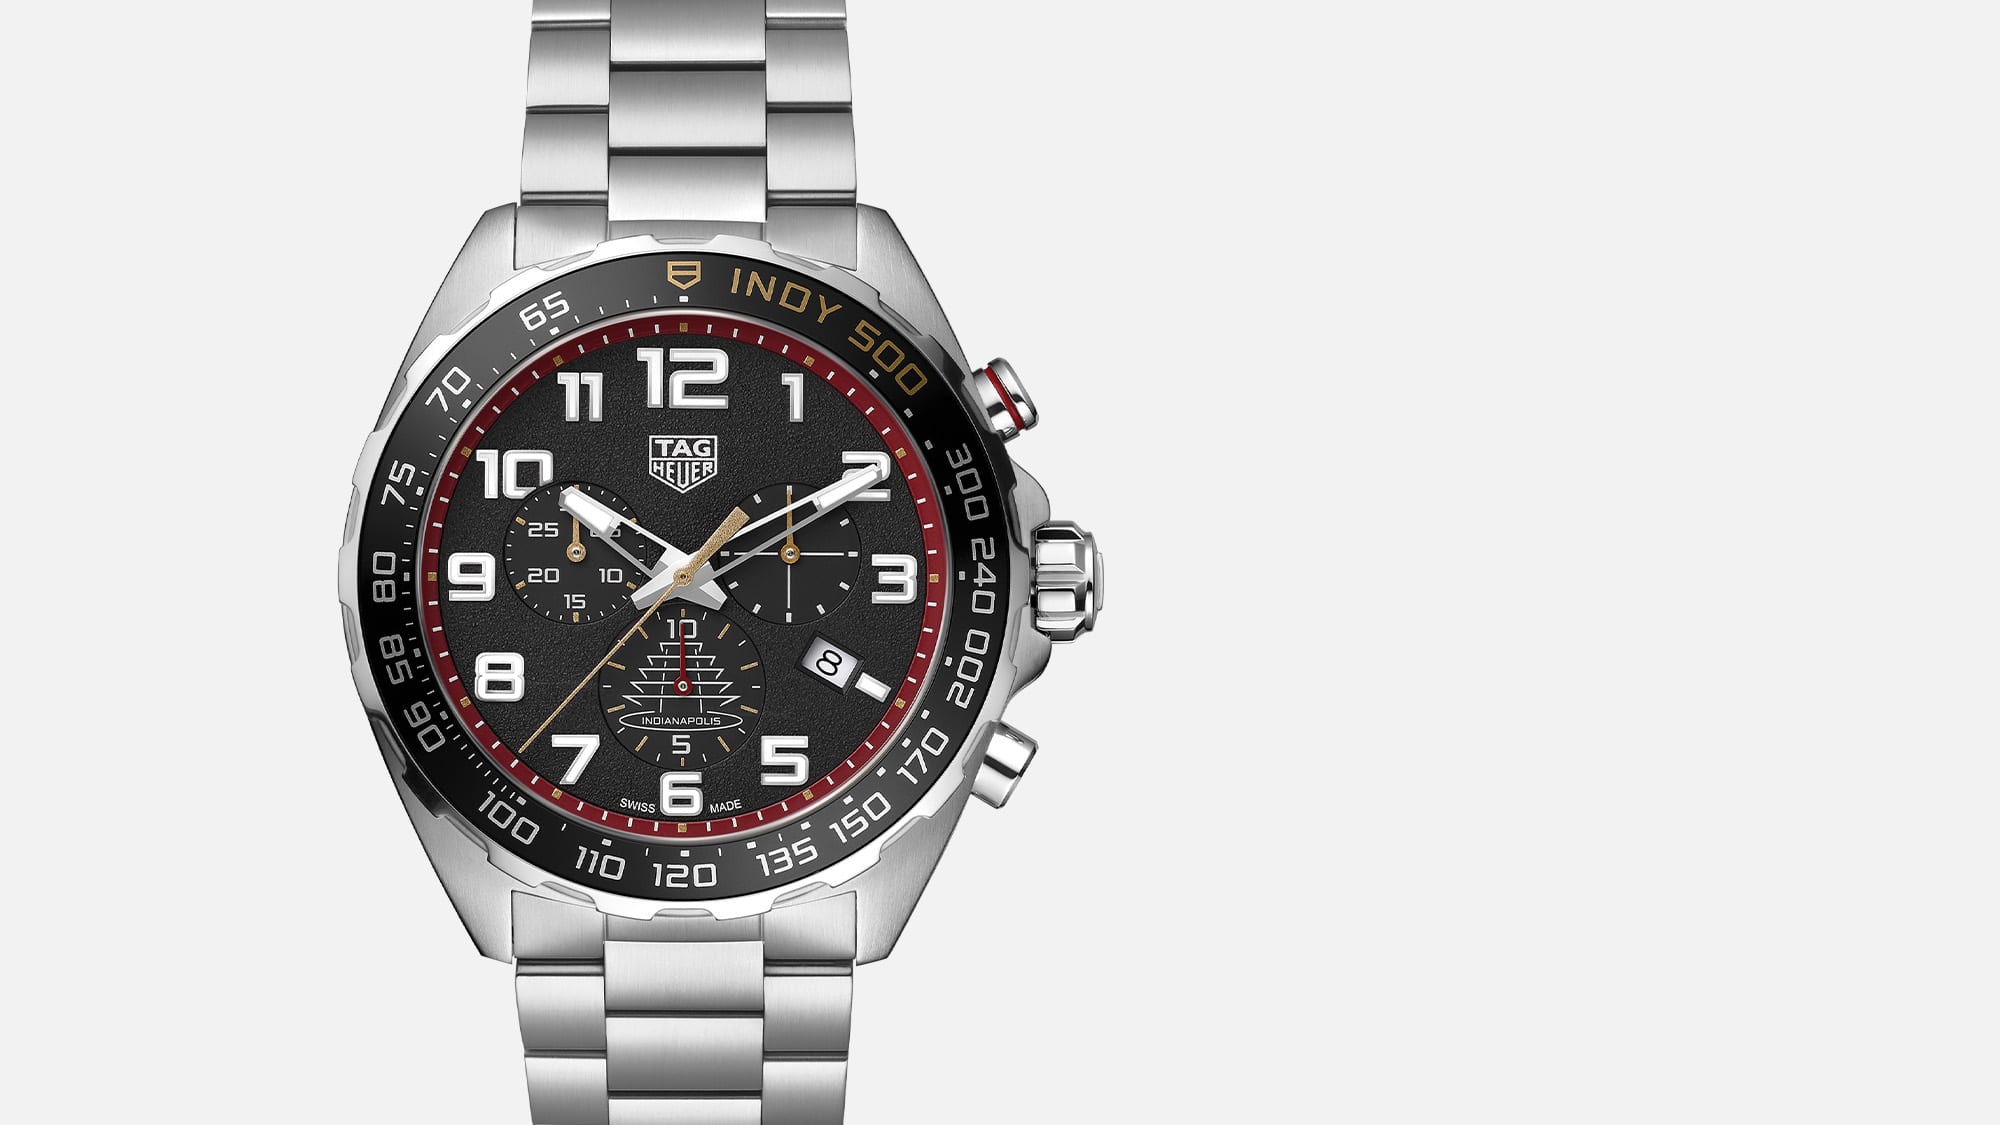 Tag Heuer Indy 500 watch